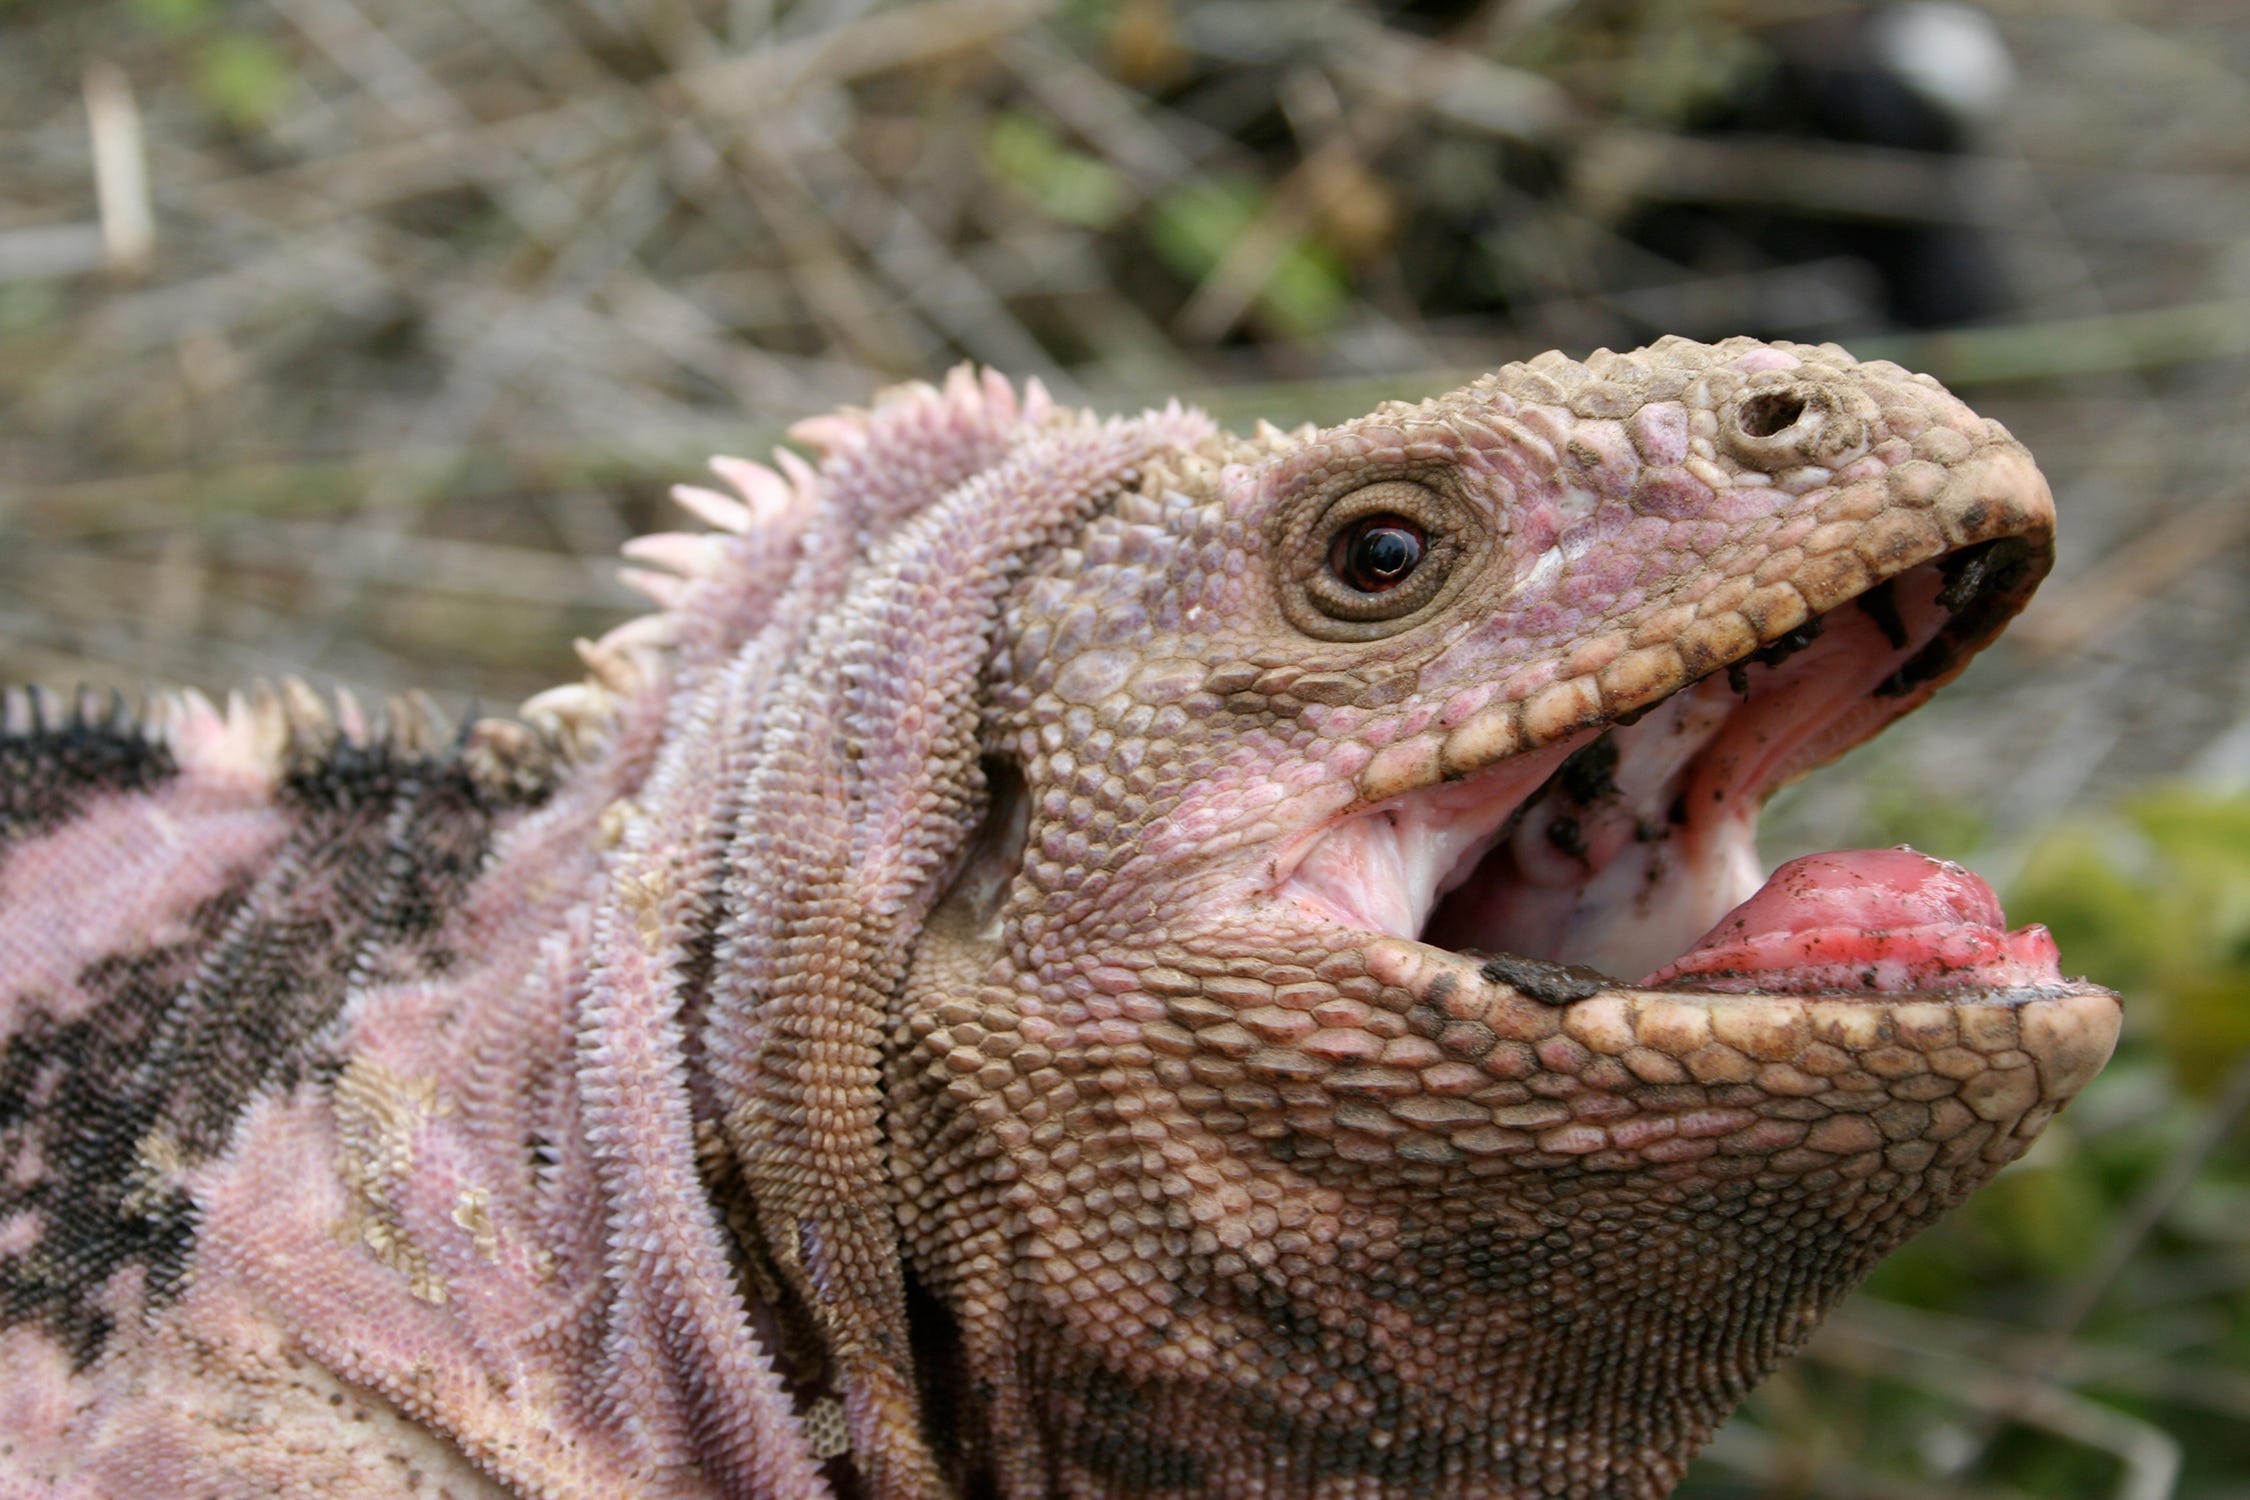 How Scientists Are Fighting to Save the Critically Endangered Pink Iguana of the Galapagos